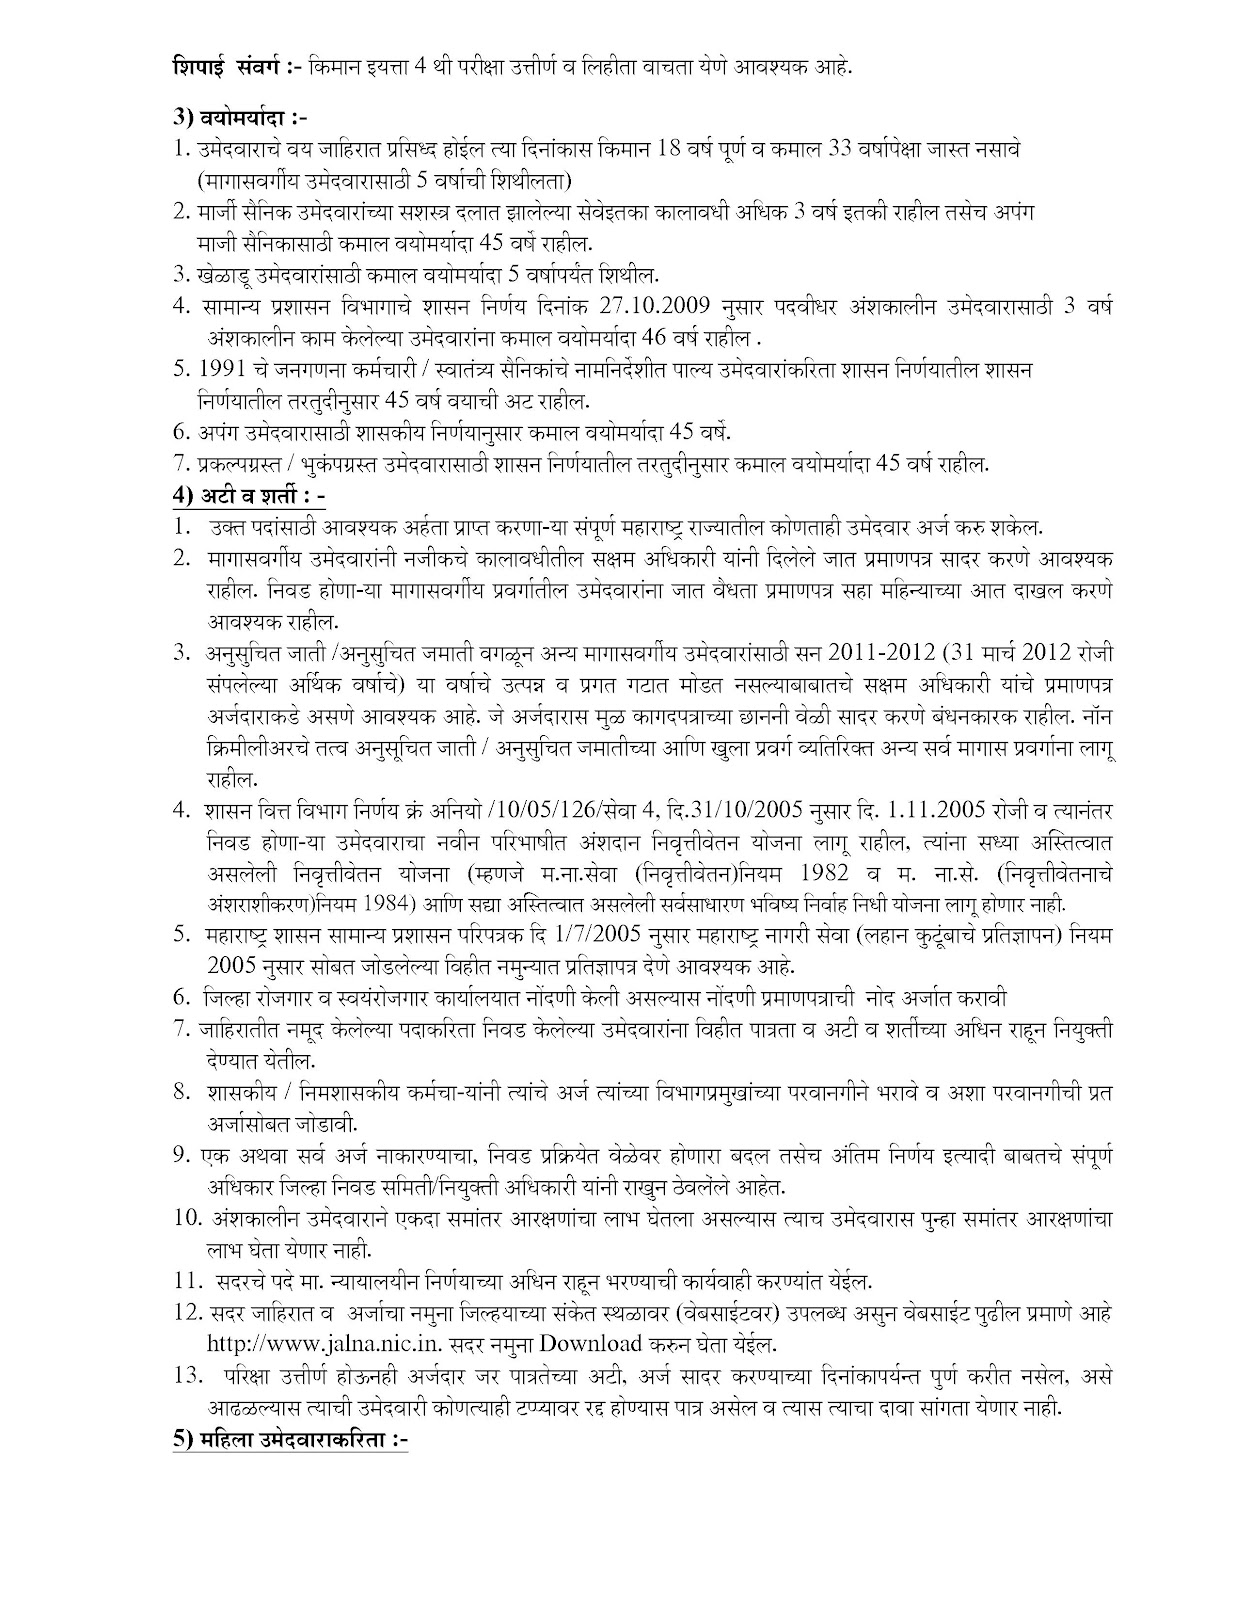 Collector Office Pune Talathi Exam Result 2012